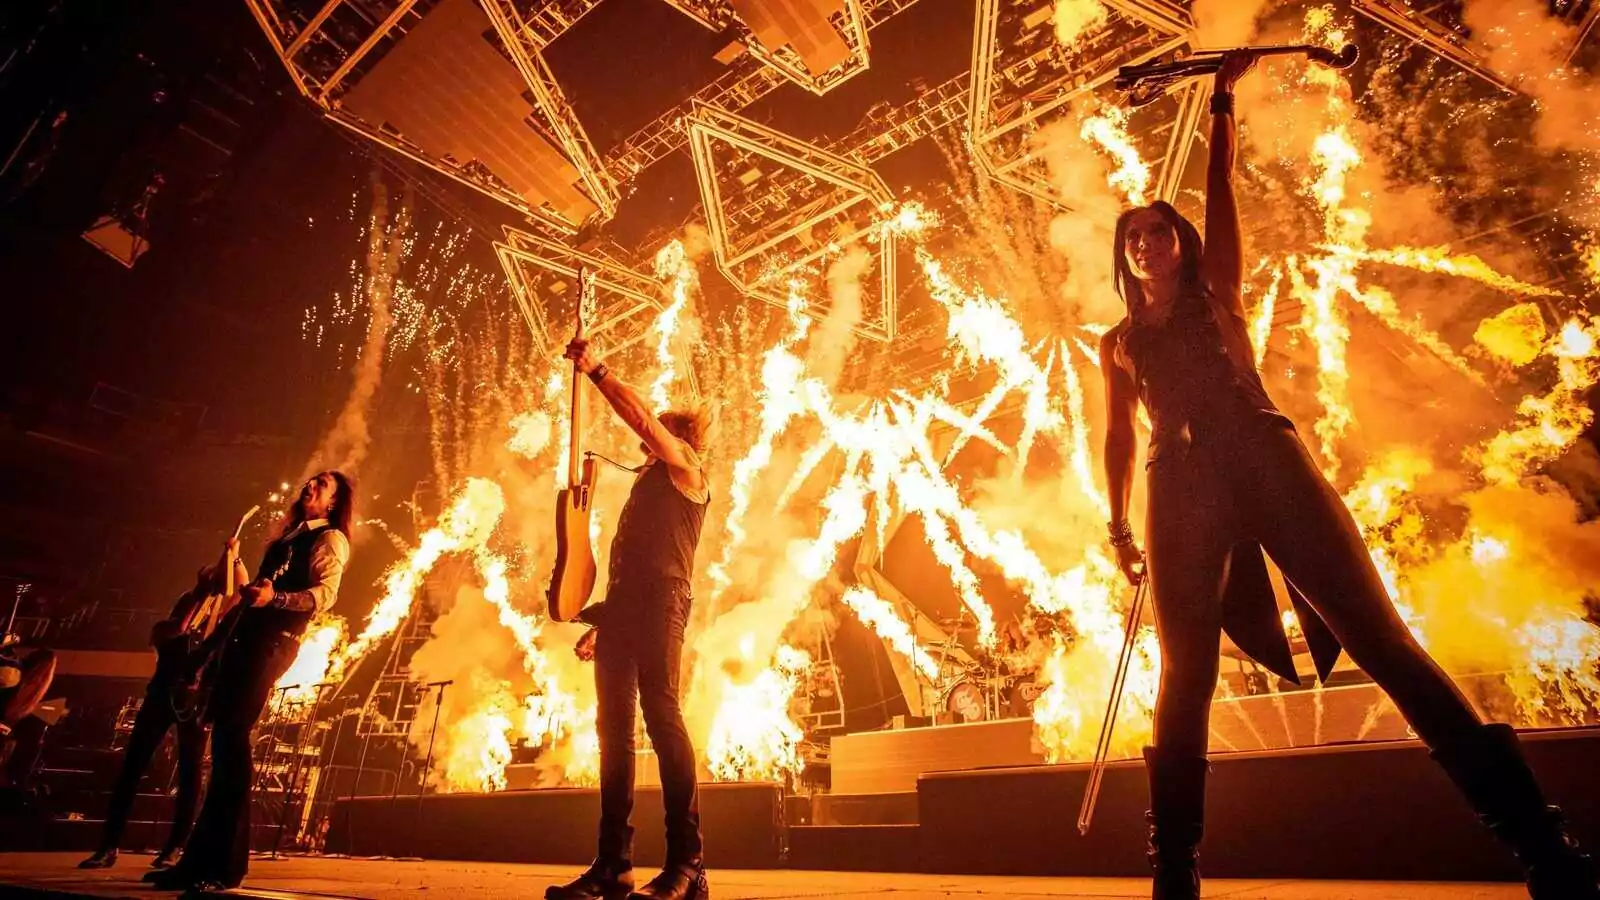 Trans-Siberian Orchestra 2023 Tour Dates - When is the closest TSO concert?